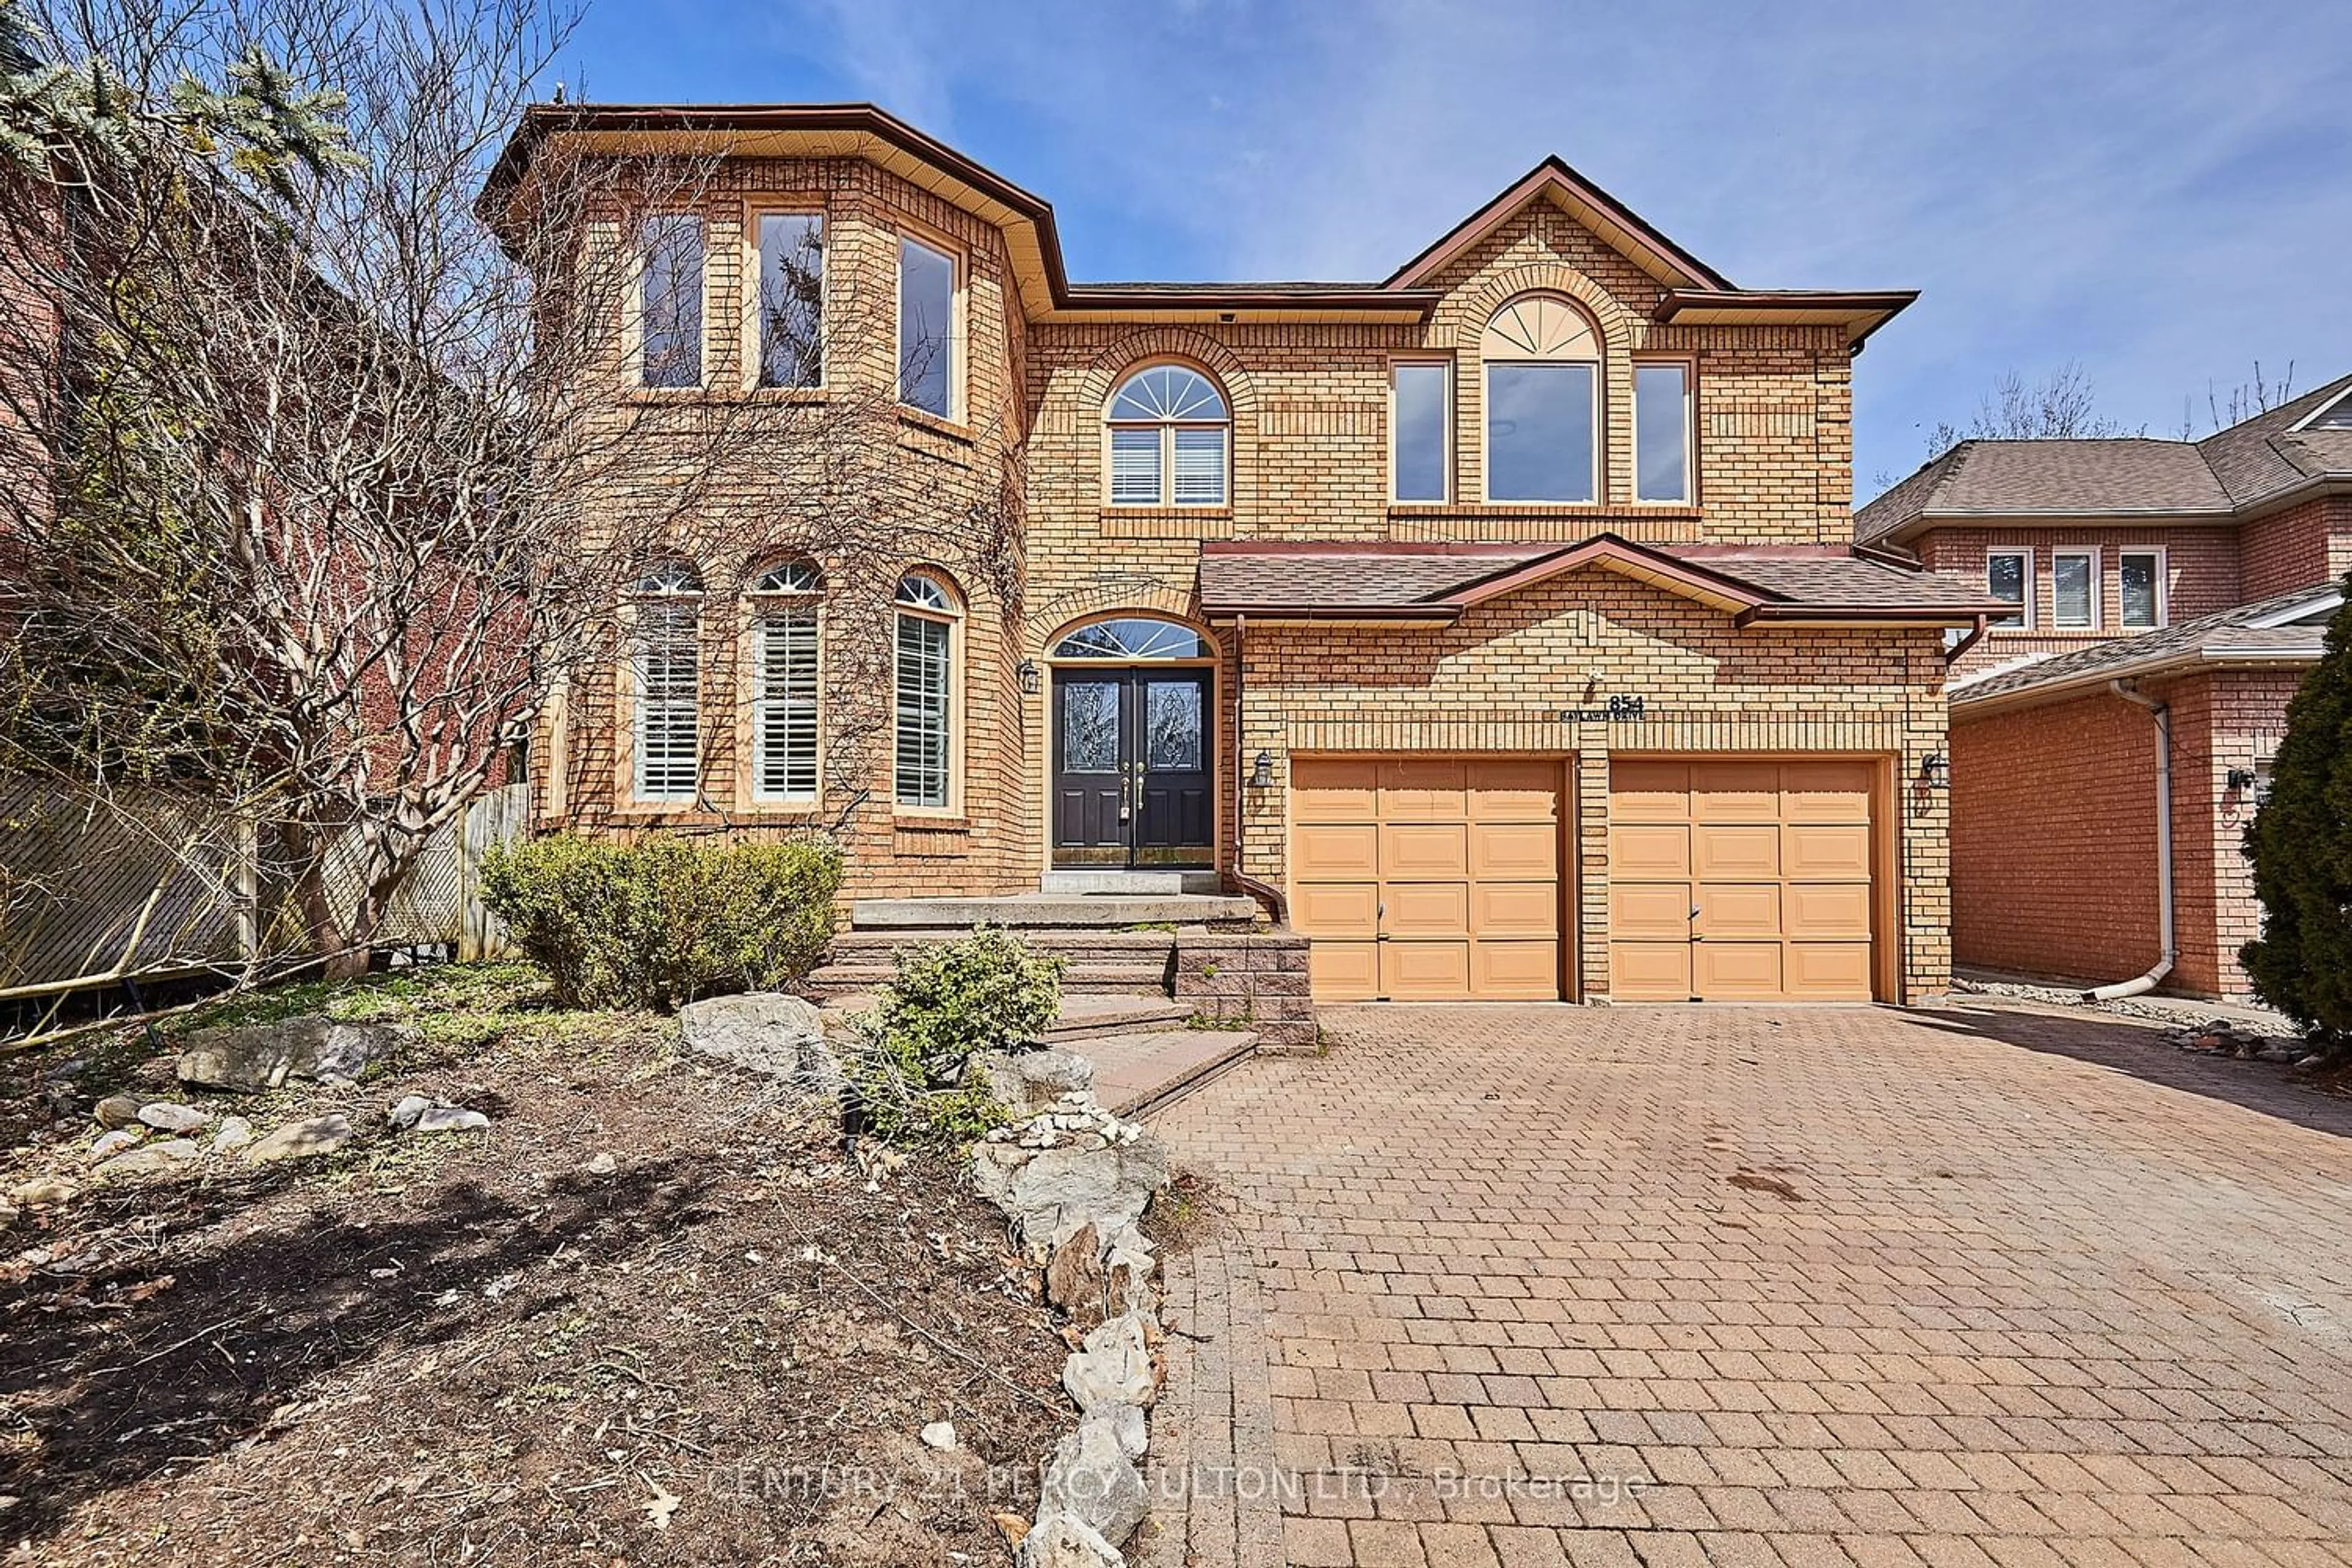 Home with brick exterior material for 854 Baylawn Dr, Pickering Ontario L1X 2R9